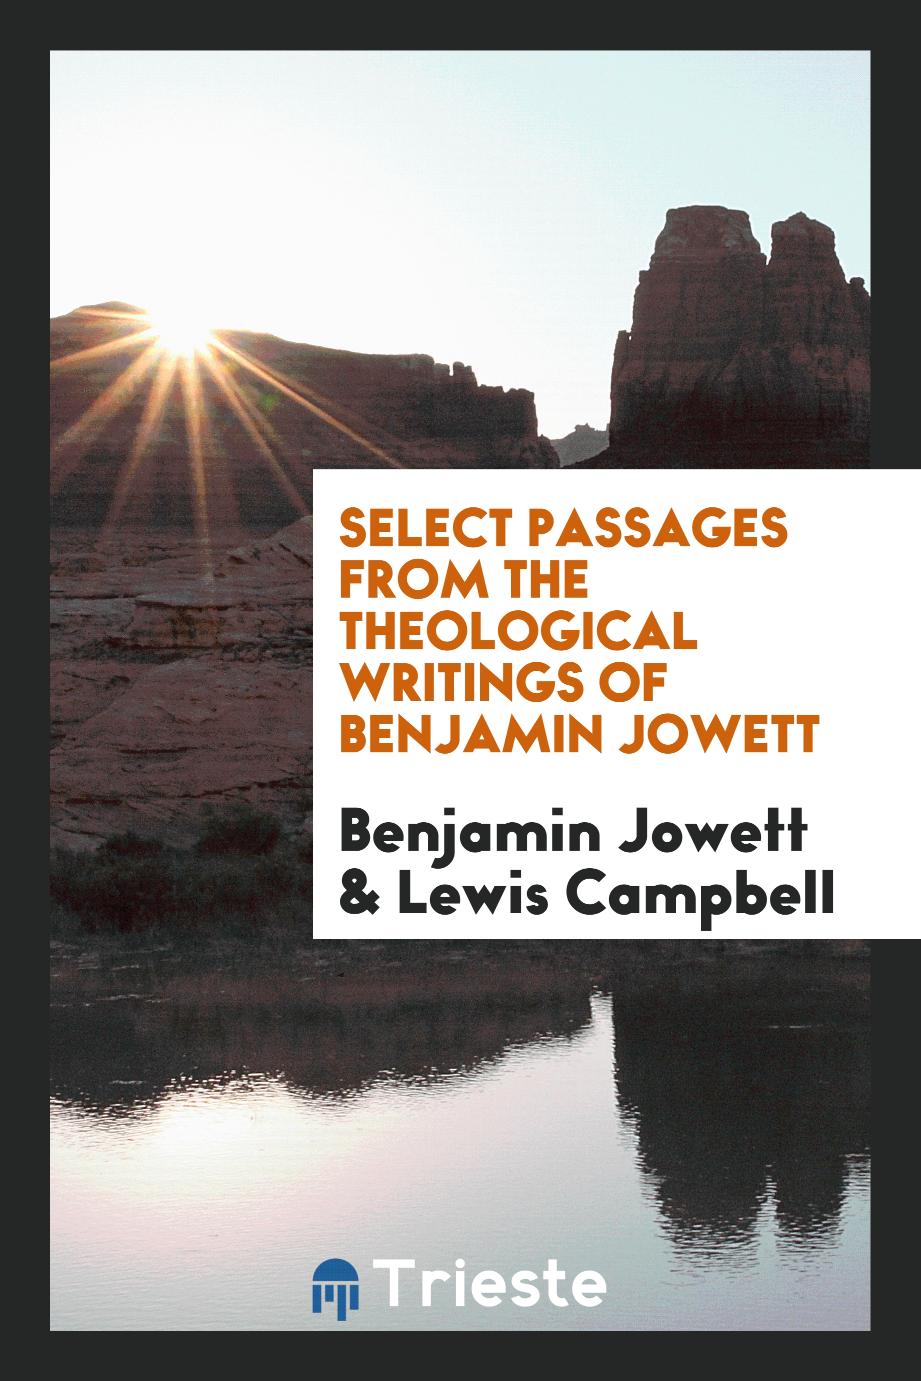 Select passages from the theological writings of Benjamin Jowett